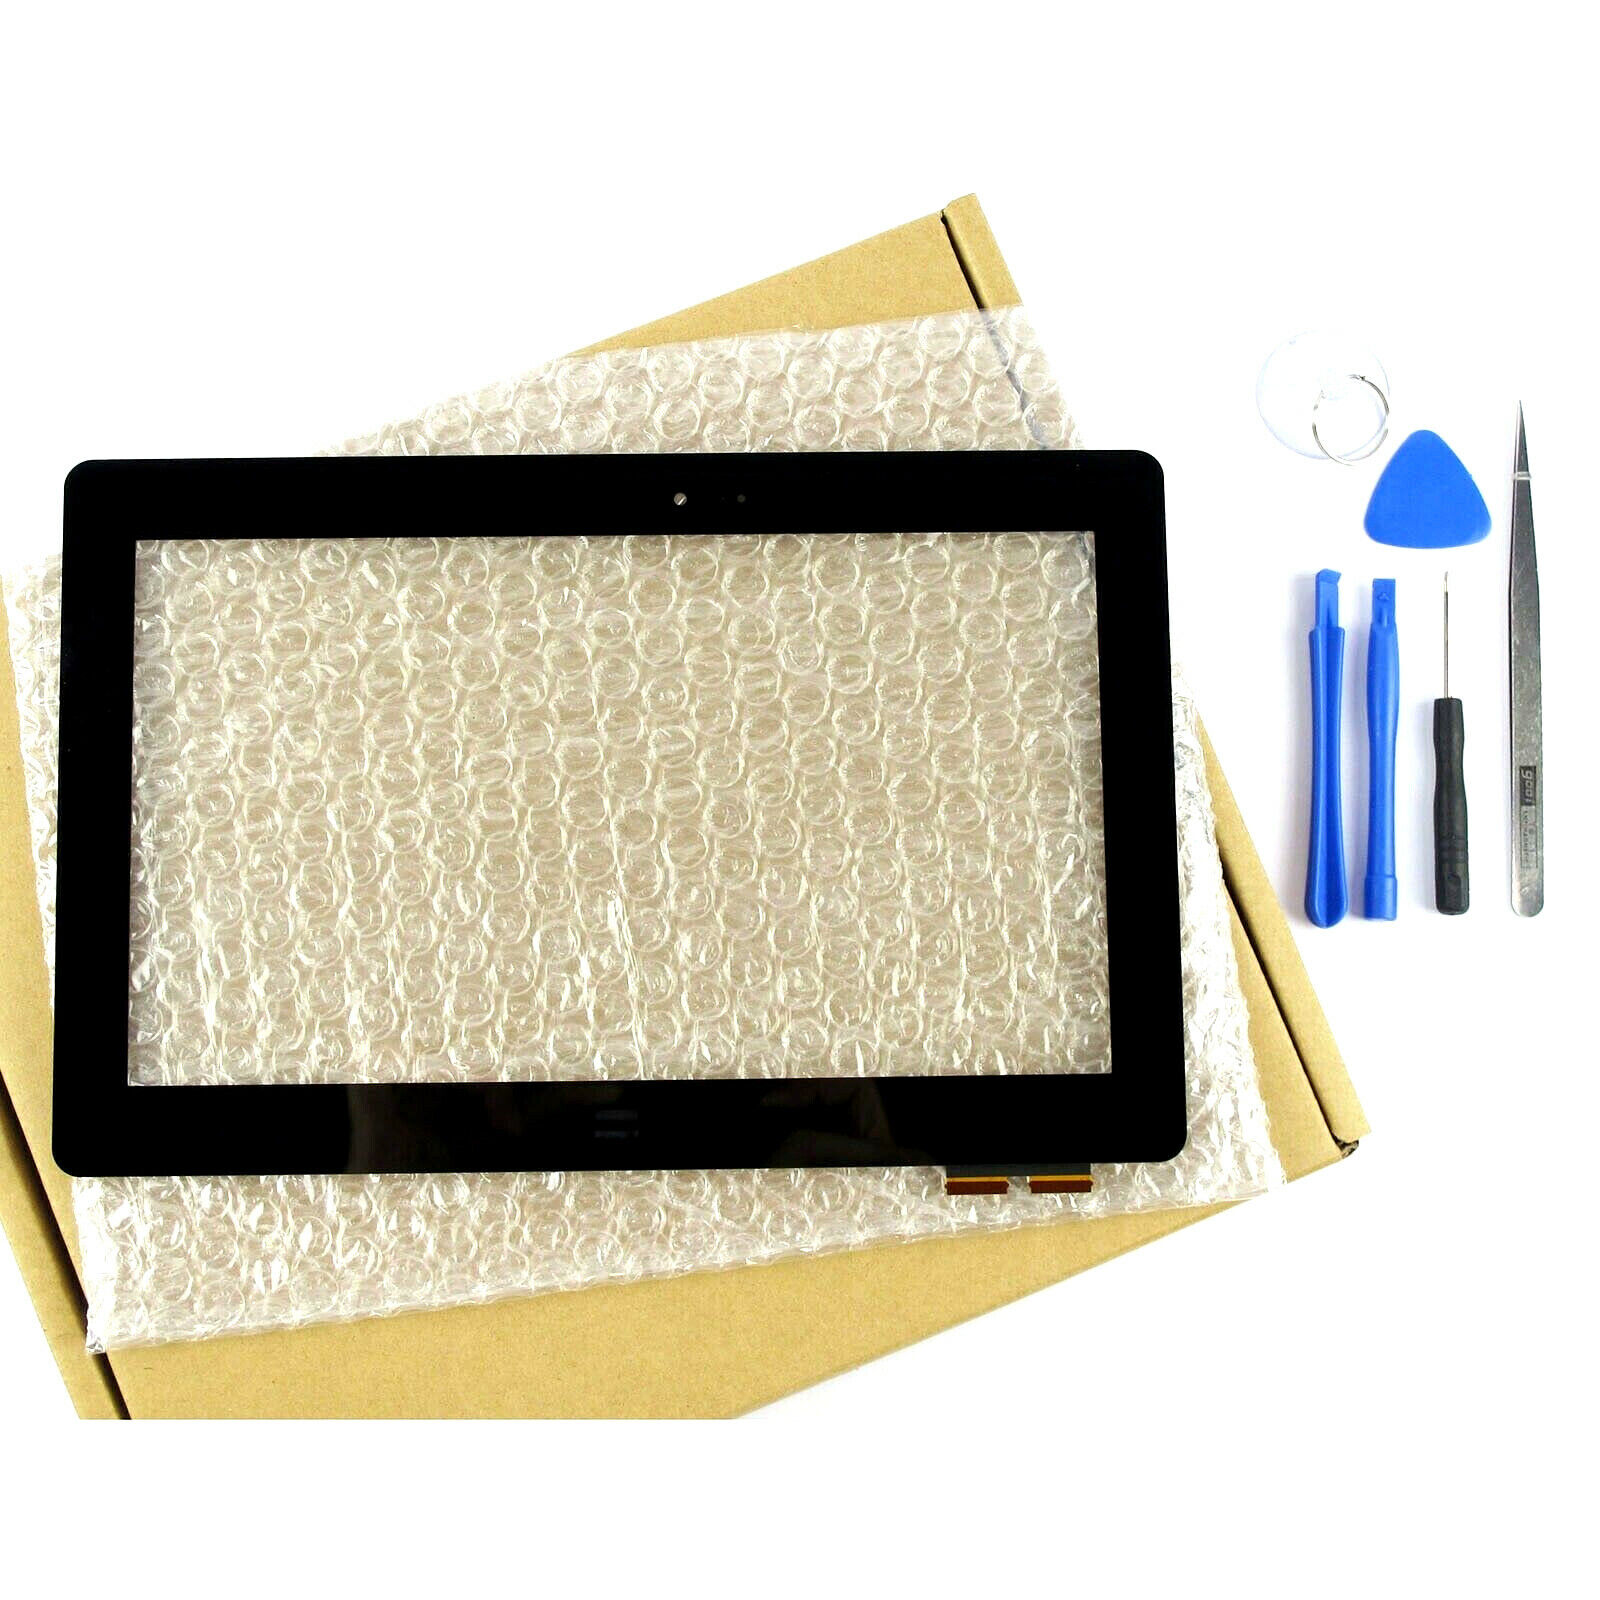 Touch Screen Digitizer with Tape and Tools for Asus Transformer Book T100 T100TA Unbranded/Generic Does Not Apply